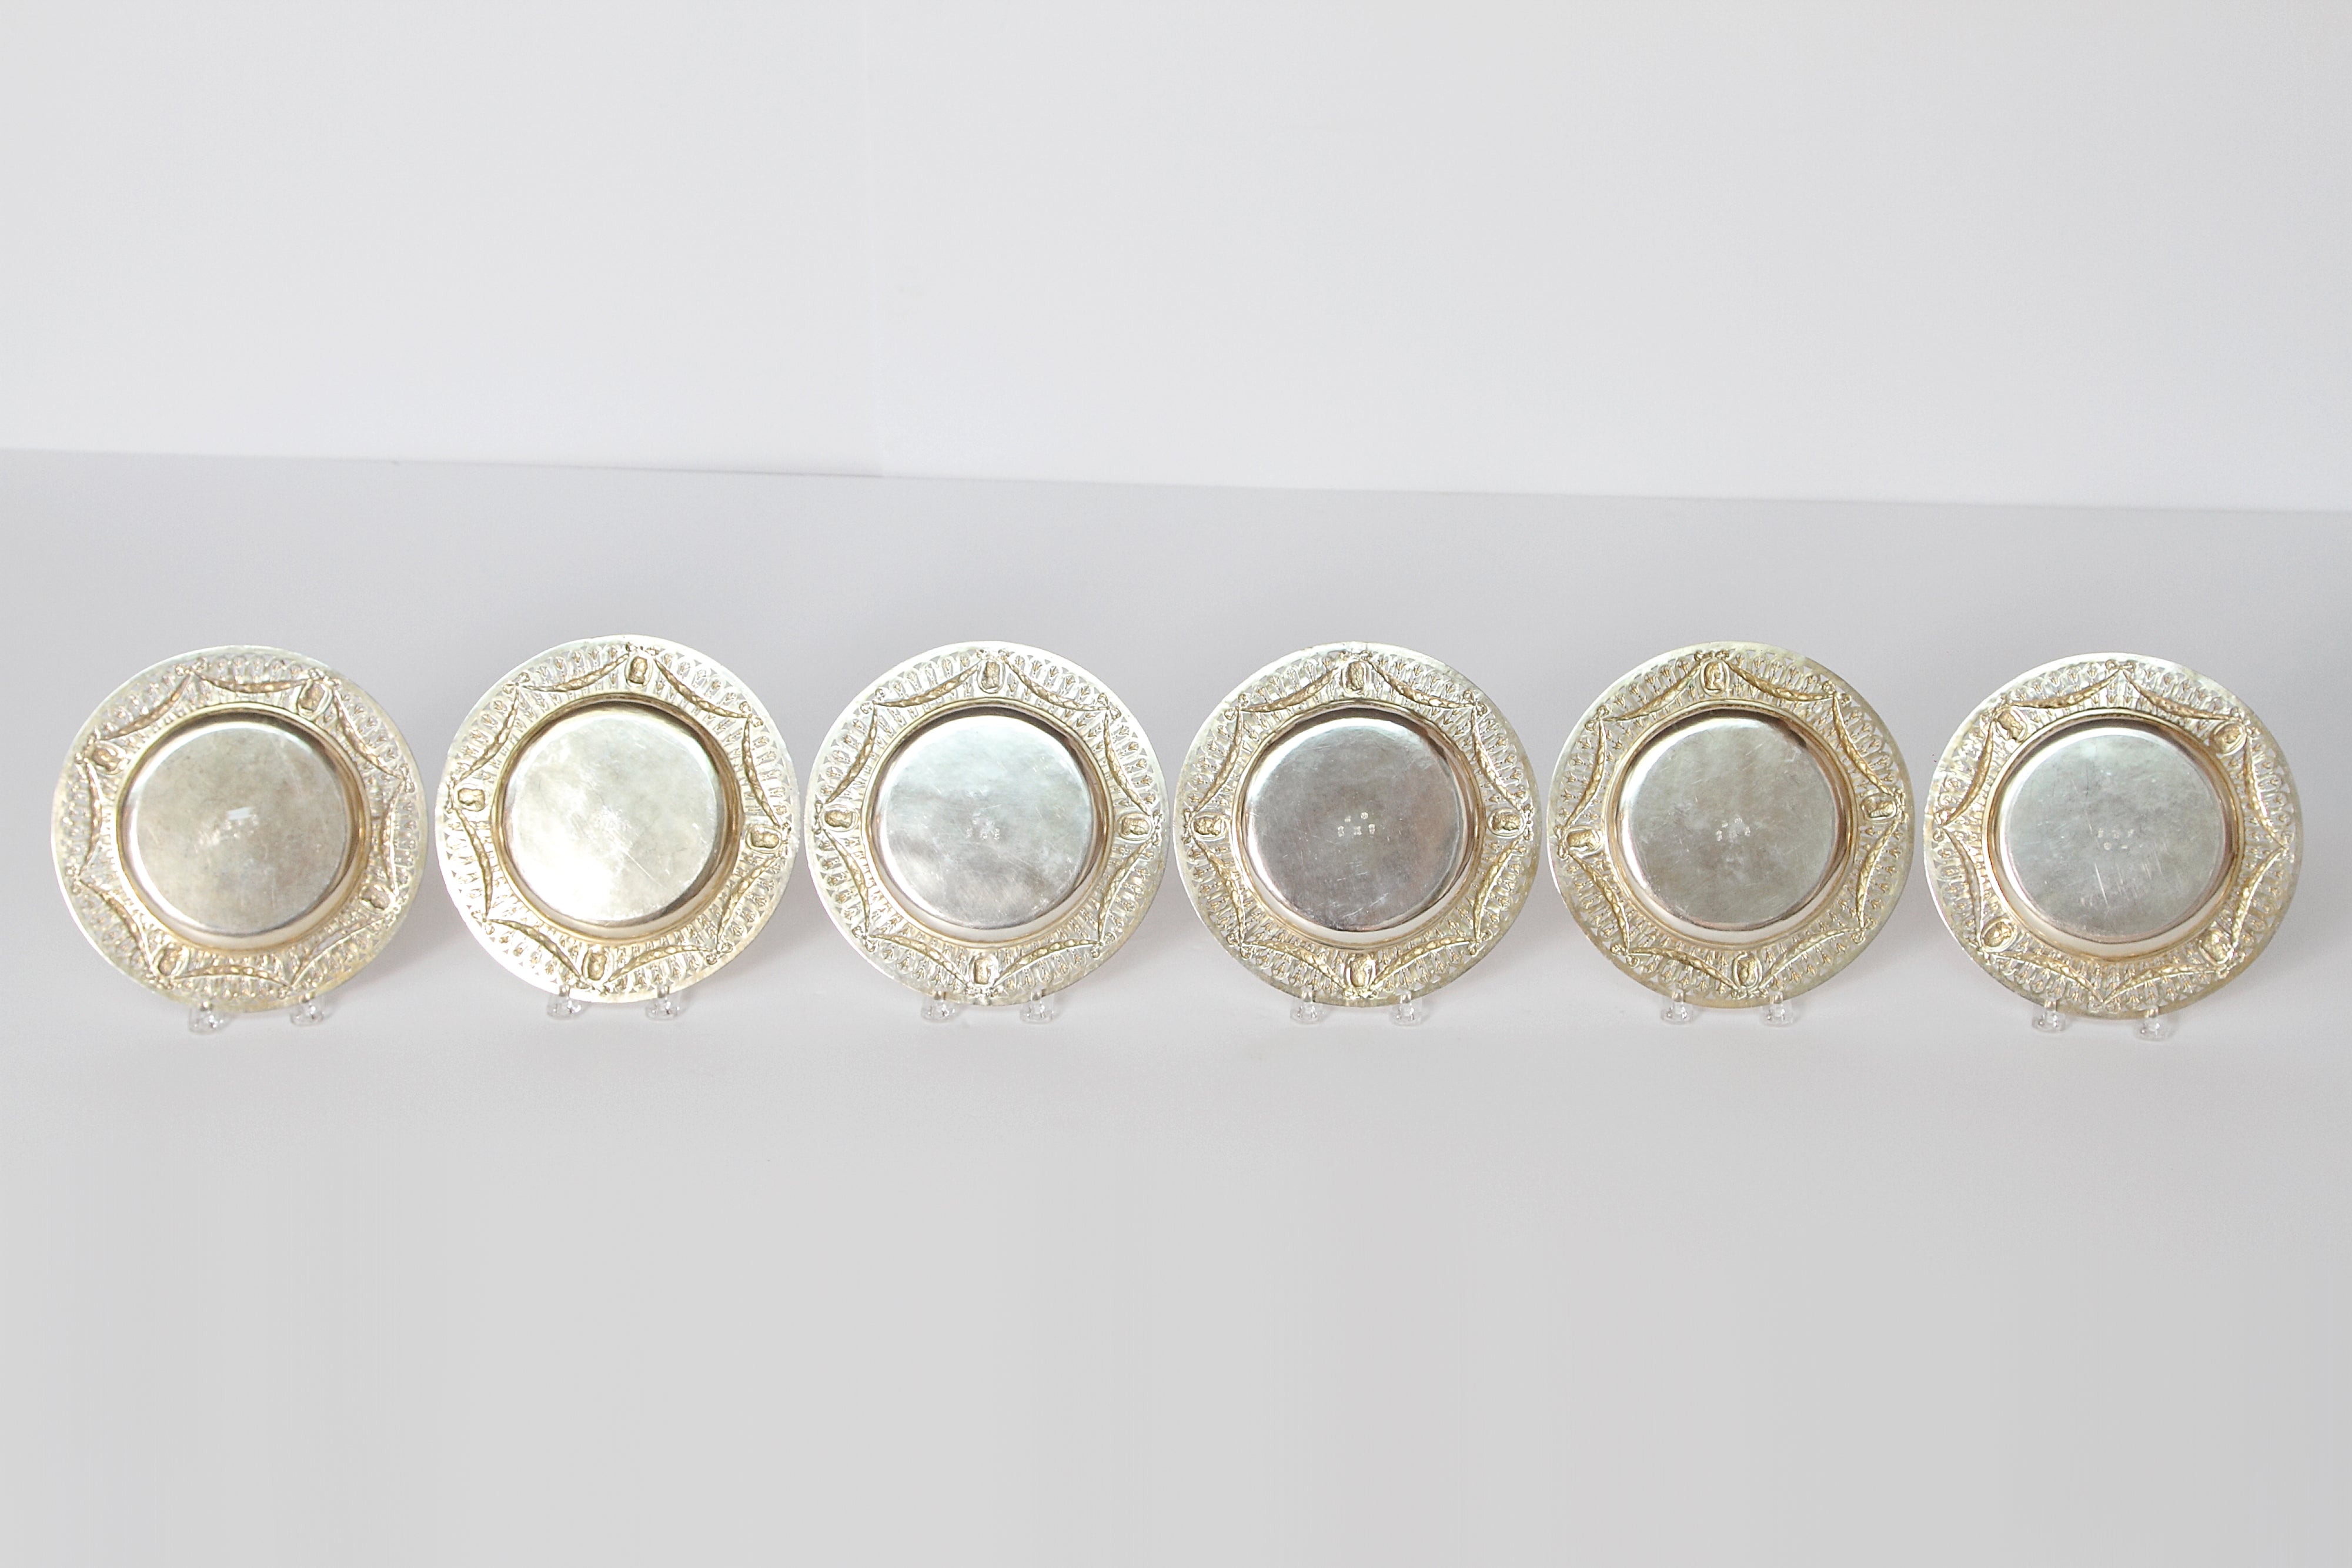 Set of Six (6) 800 German Silver Plates with Pierced Borders